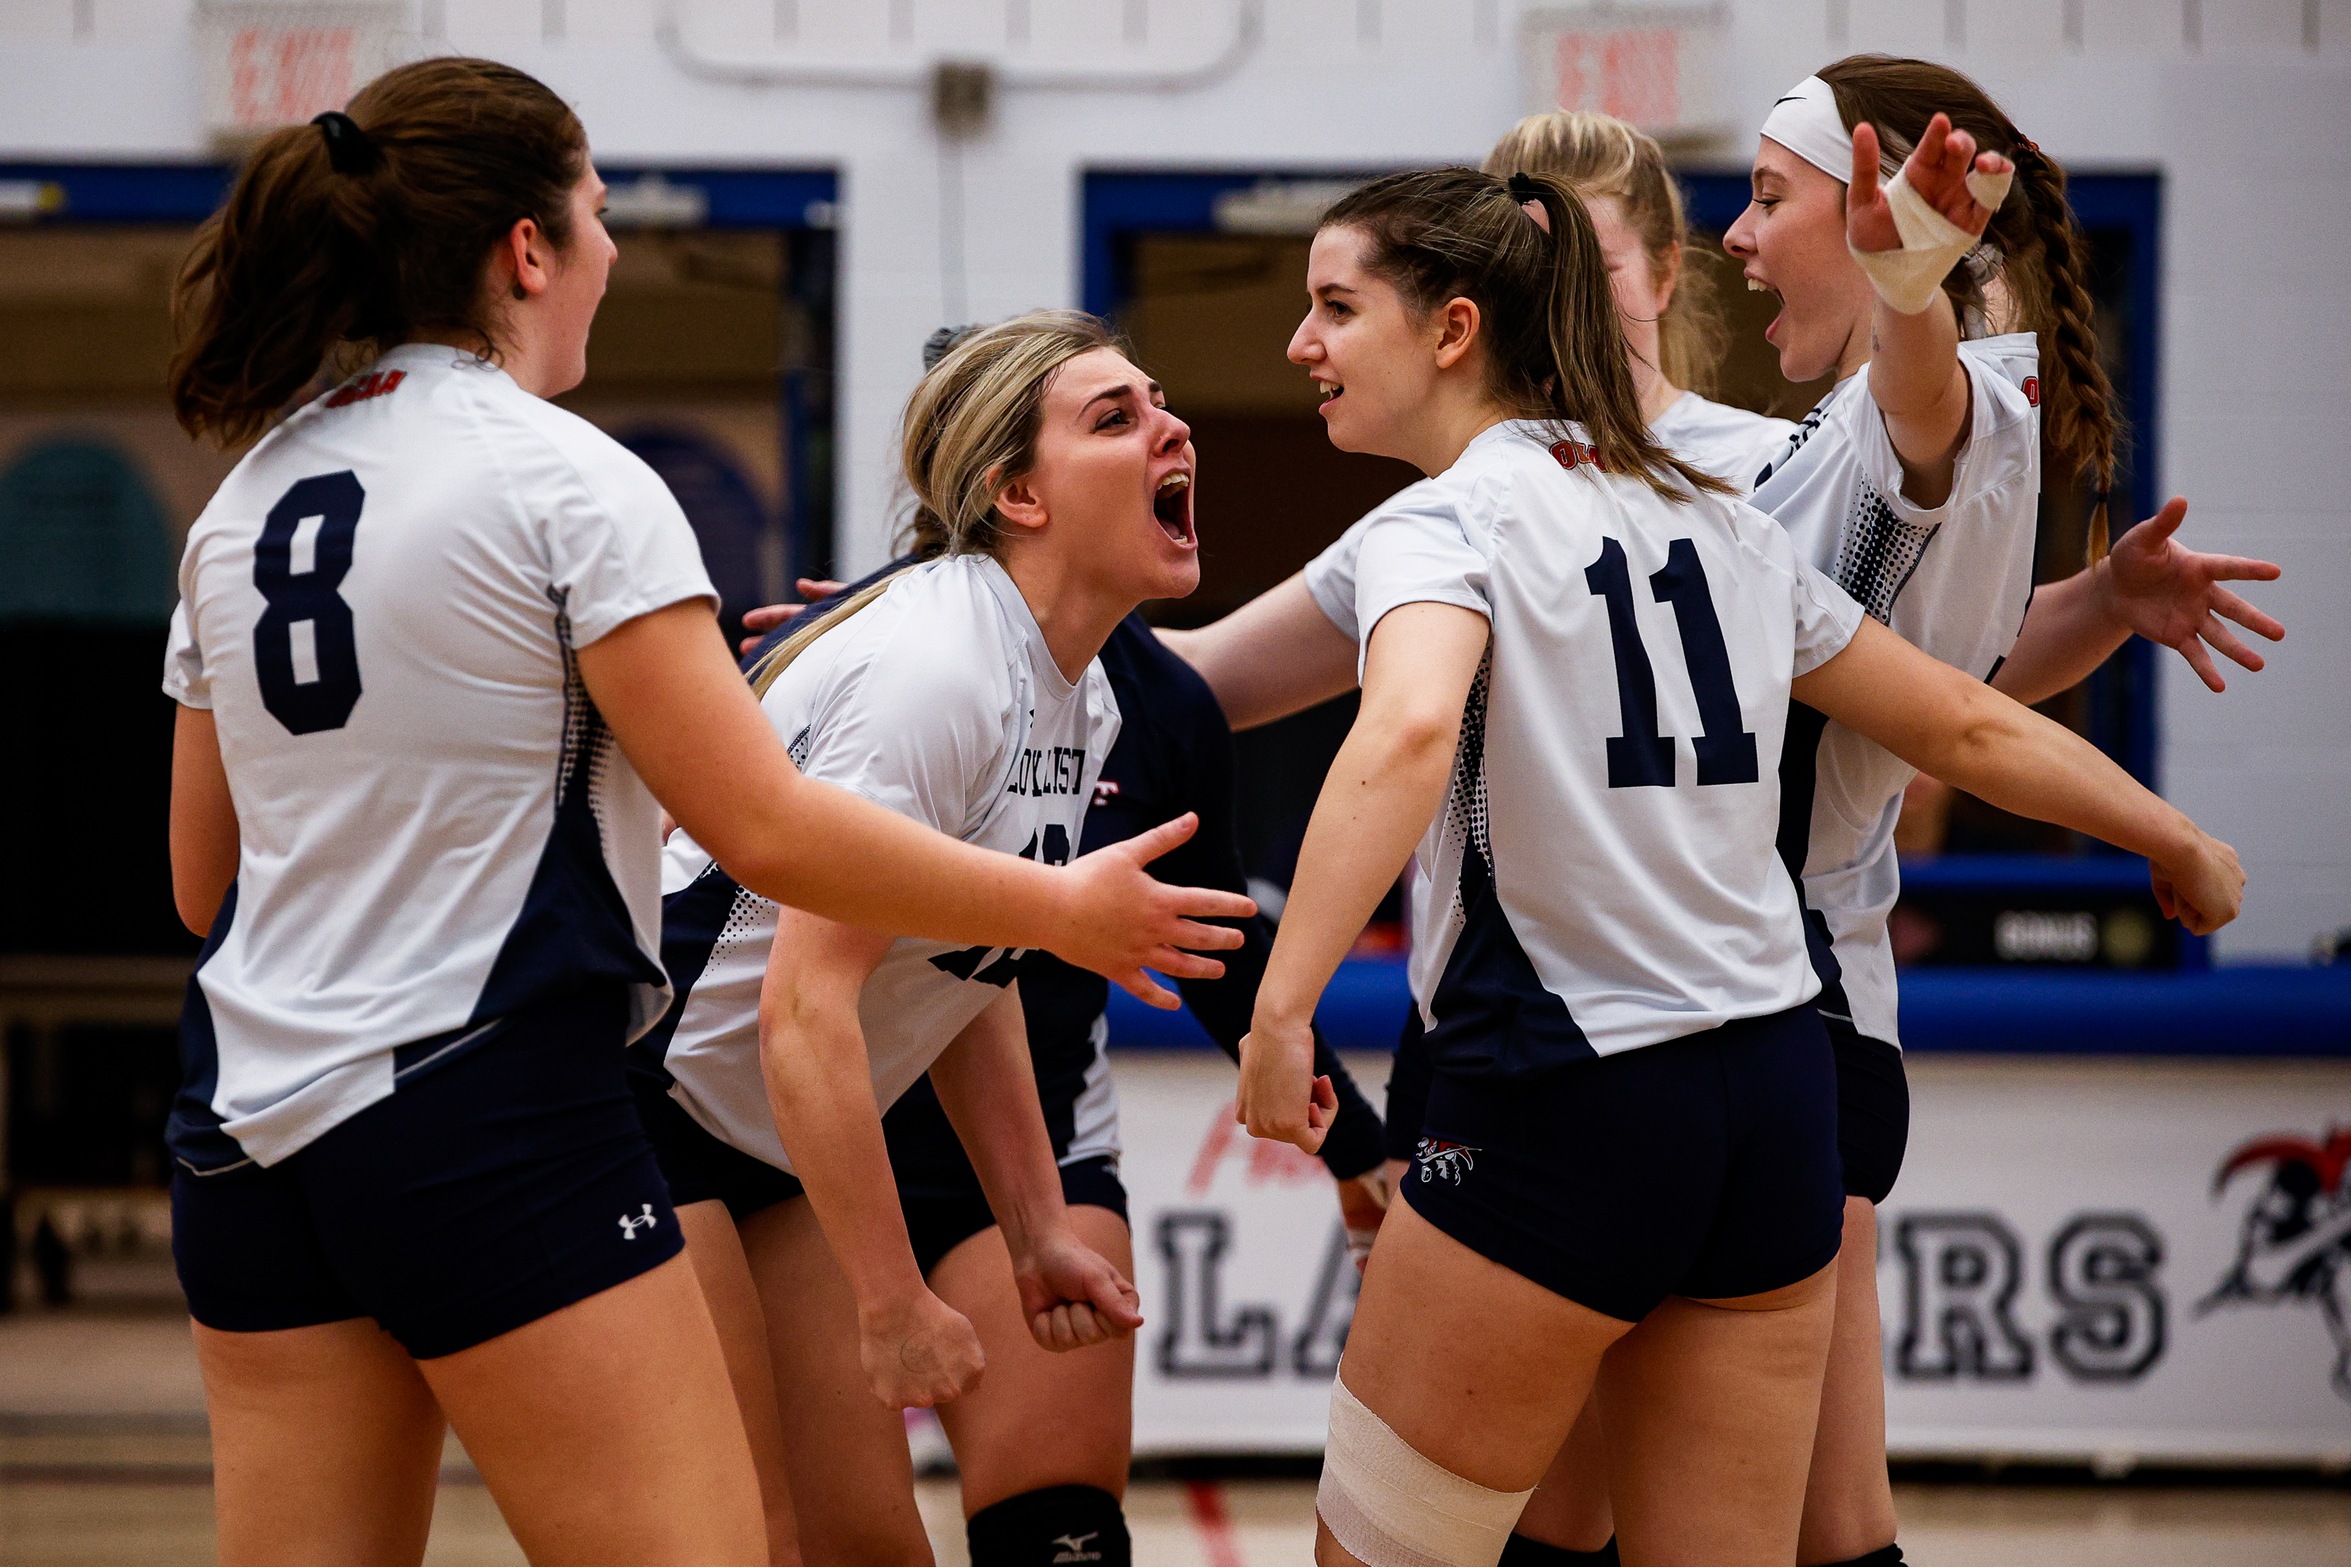 LANCERS TAKE KNIGHTS IN STRAIGHT SETS